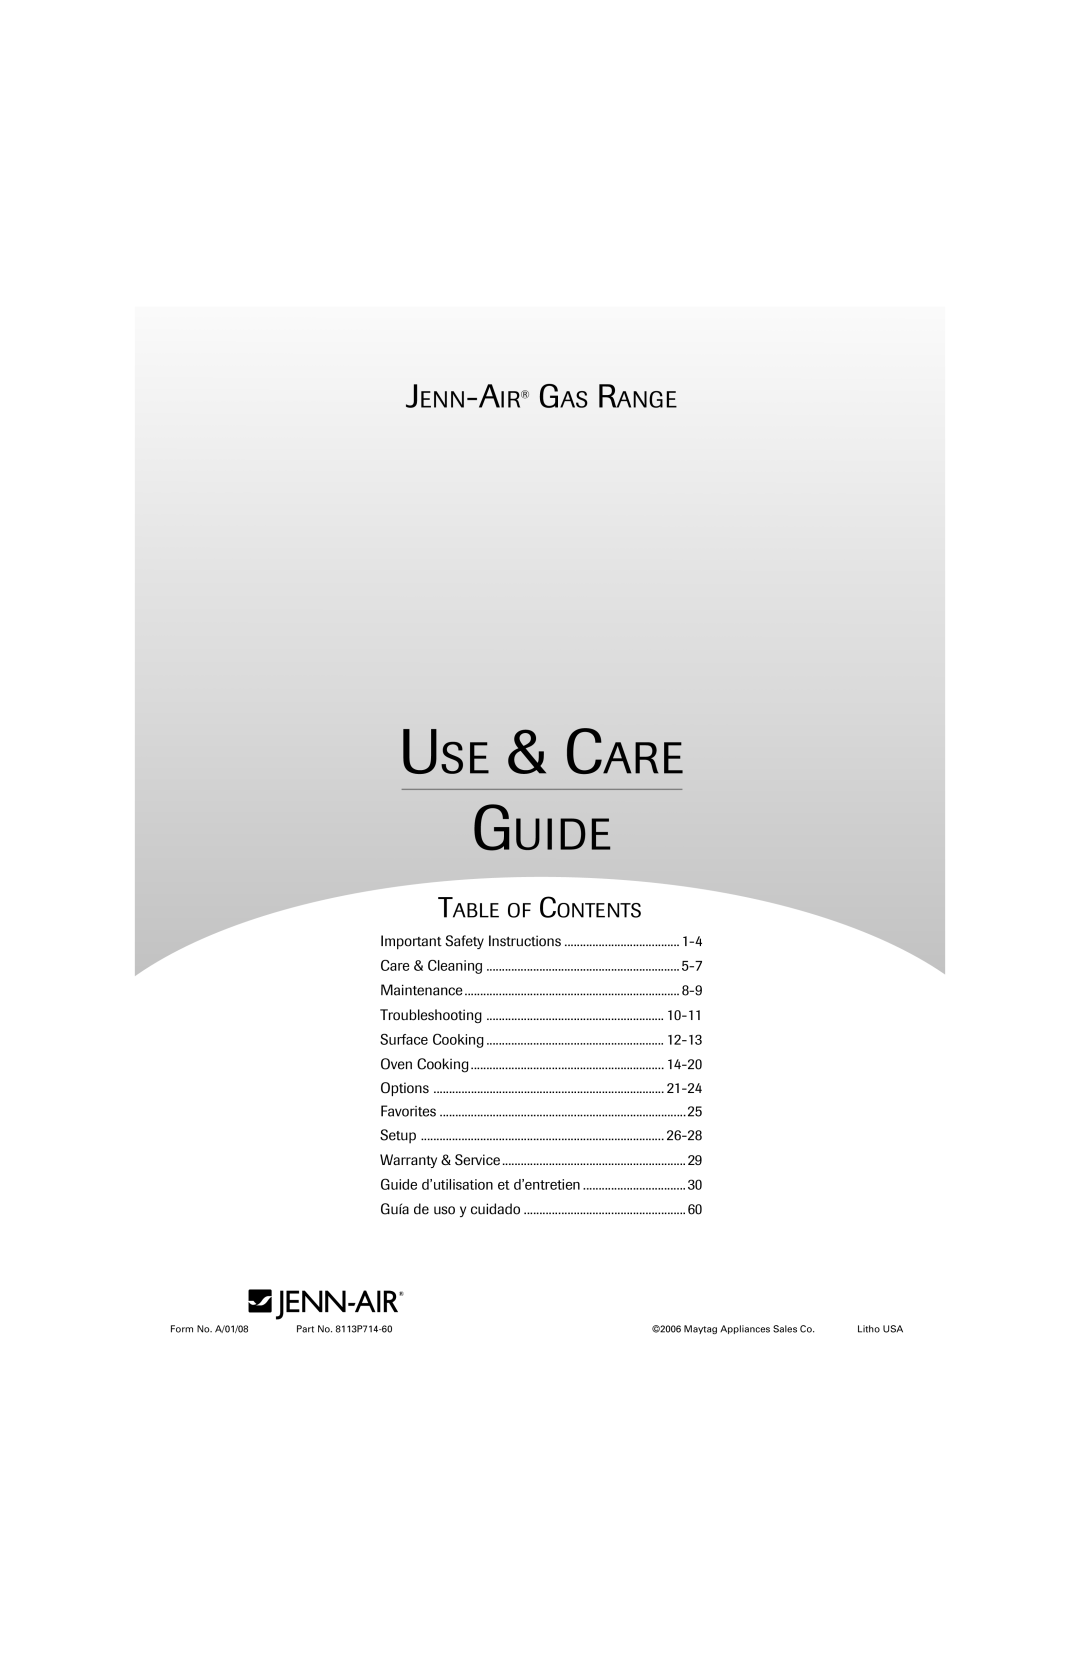 Jenn-Air 8113P714-60 important safety instructions Use & Care Guide, Jenn-Air Gas Range, Table Of Contents 